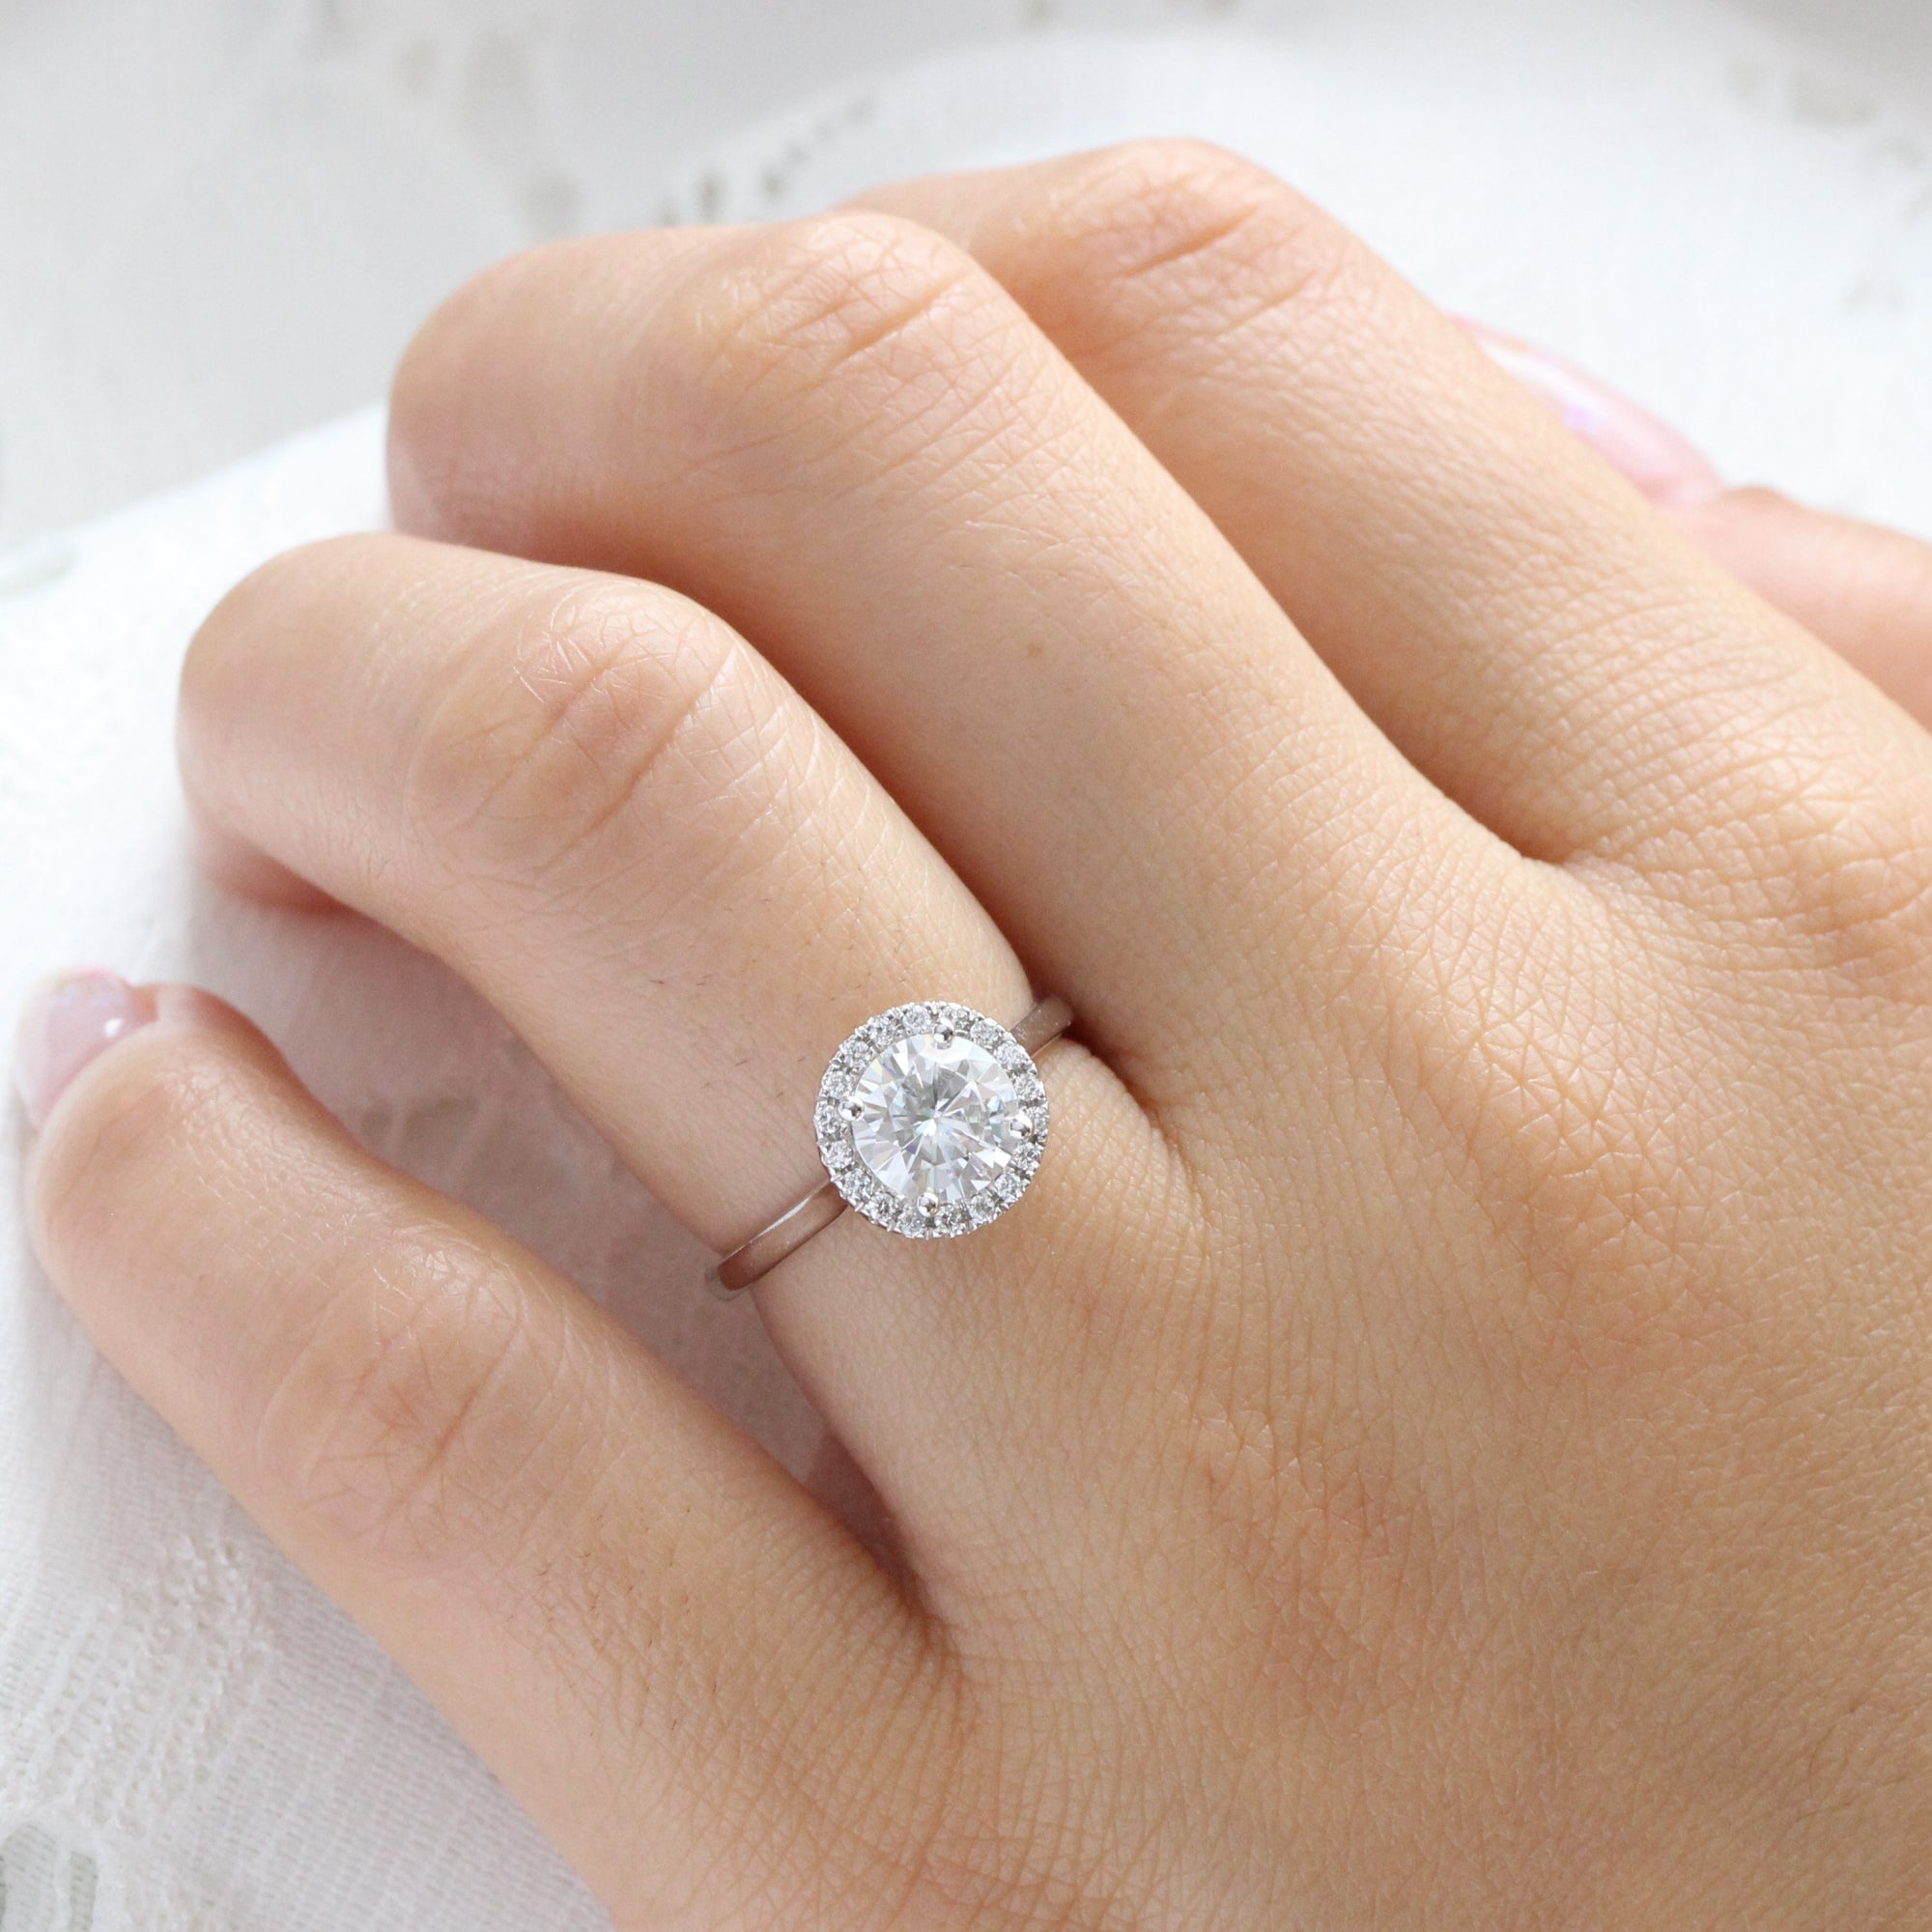 Luna Halo Round Engagement Ring w/ Moissanite and Diamond in Plain Band